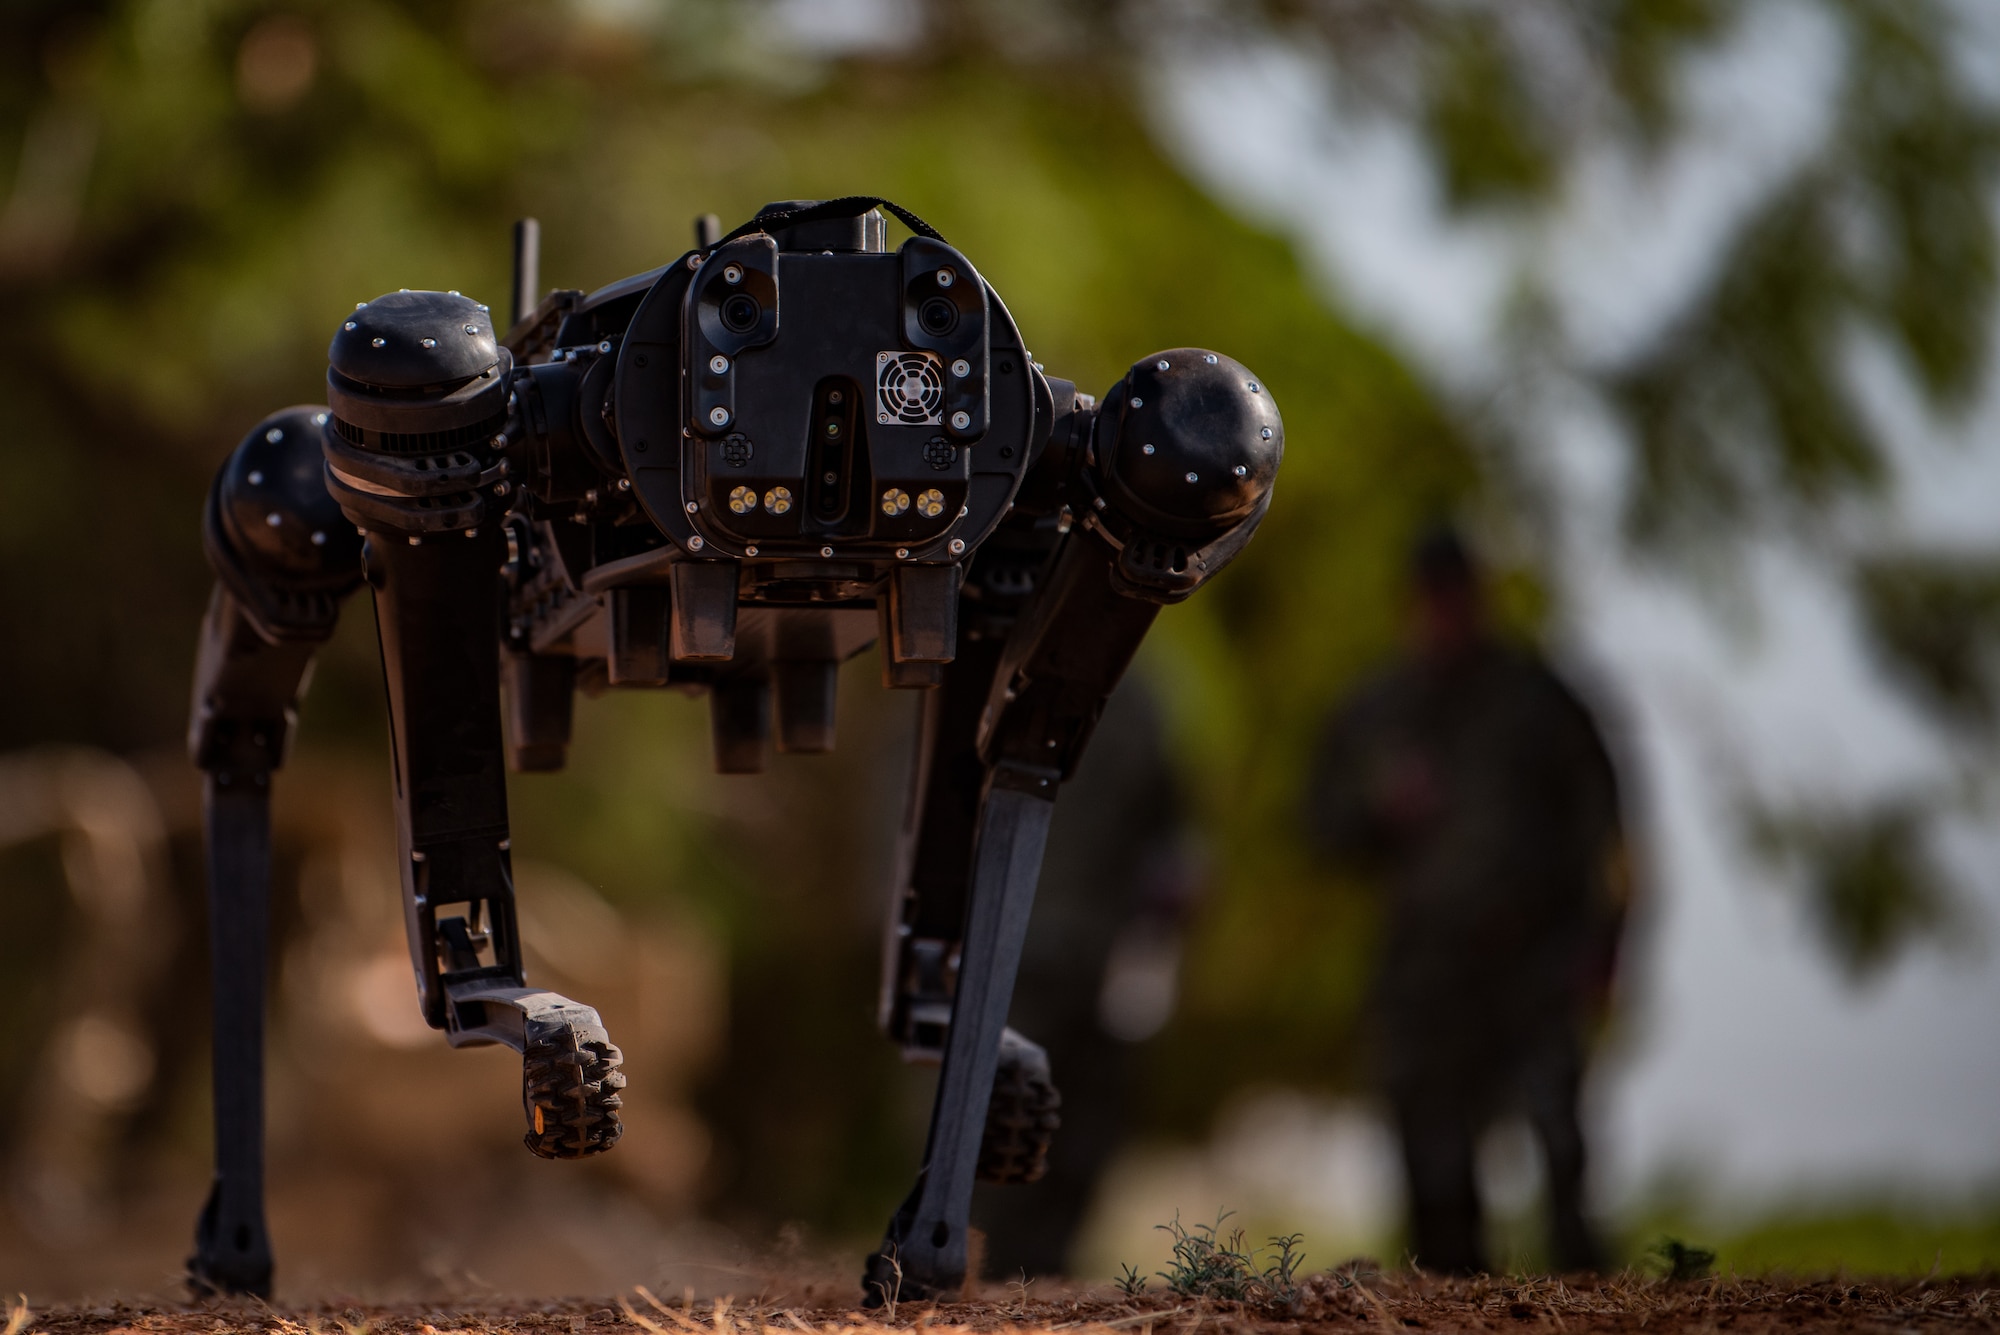 A robot dog runs during initial training exercise at Dyess Air Force Base, Texas, Aug. 5, 2022. This newly procured Ghost Robotics model of robot dog has a top speed of six miles per hour. (U.S. Air Force photo by Airman 1st Class Ryan Hayman)